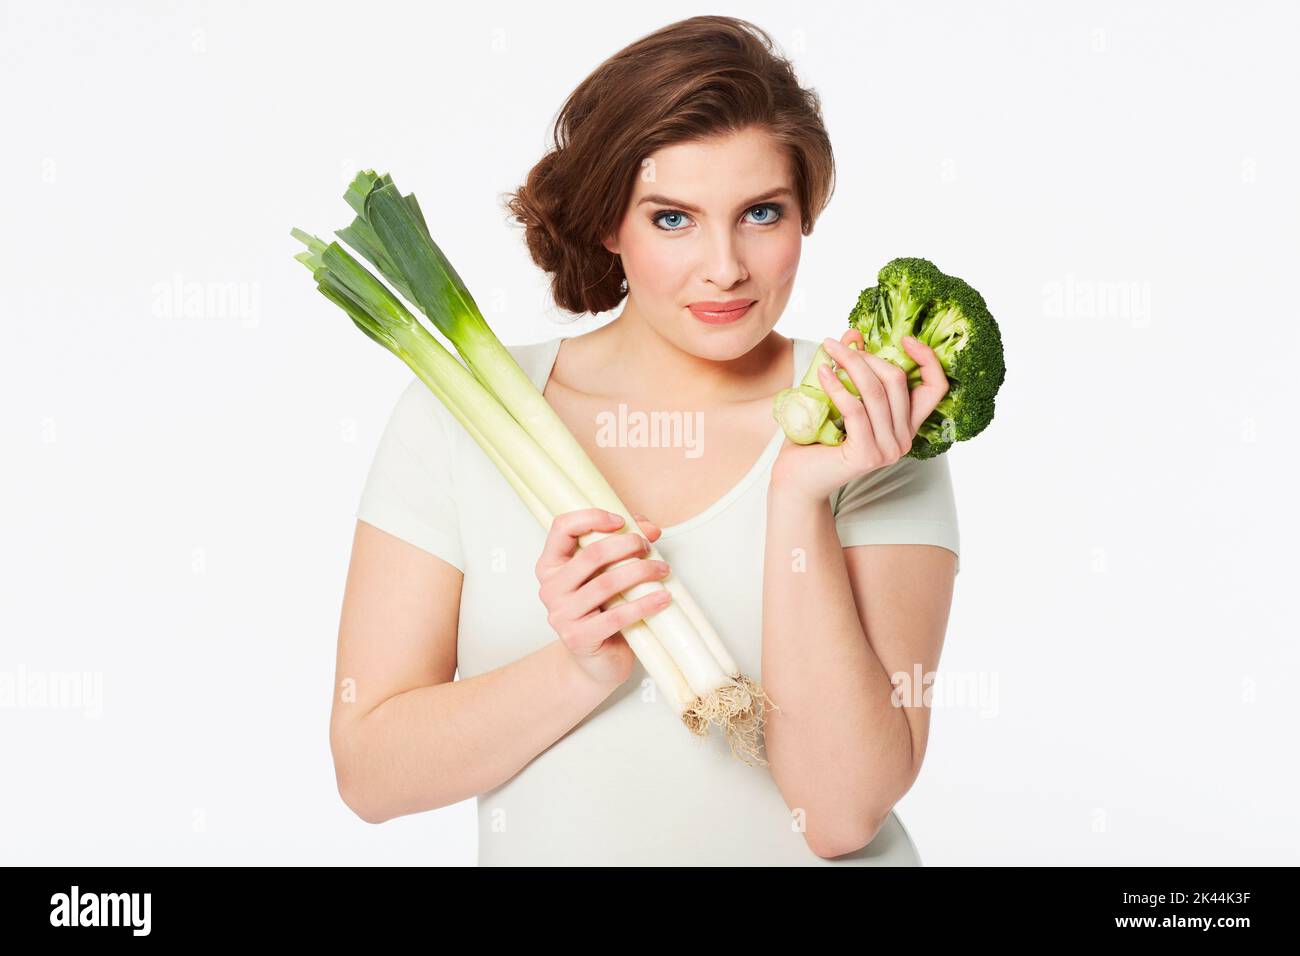 Healthy habit are important. Pretty brunette woman holding some healthy veggies while Isolated on white. Stock Photo